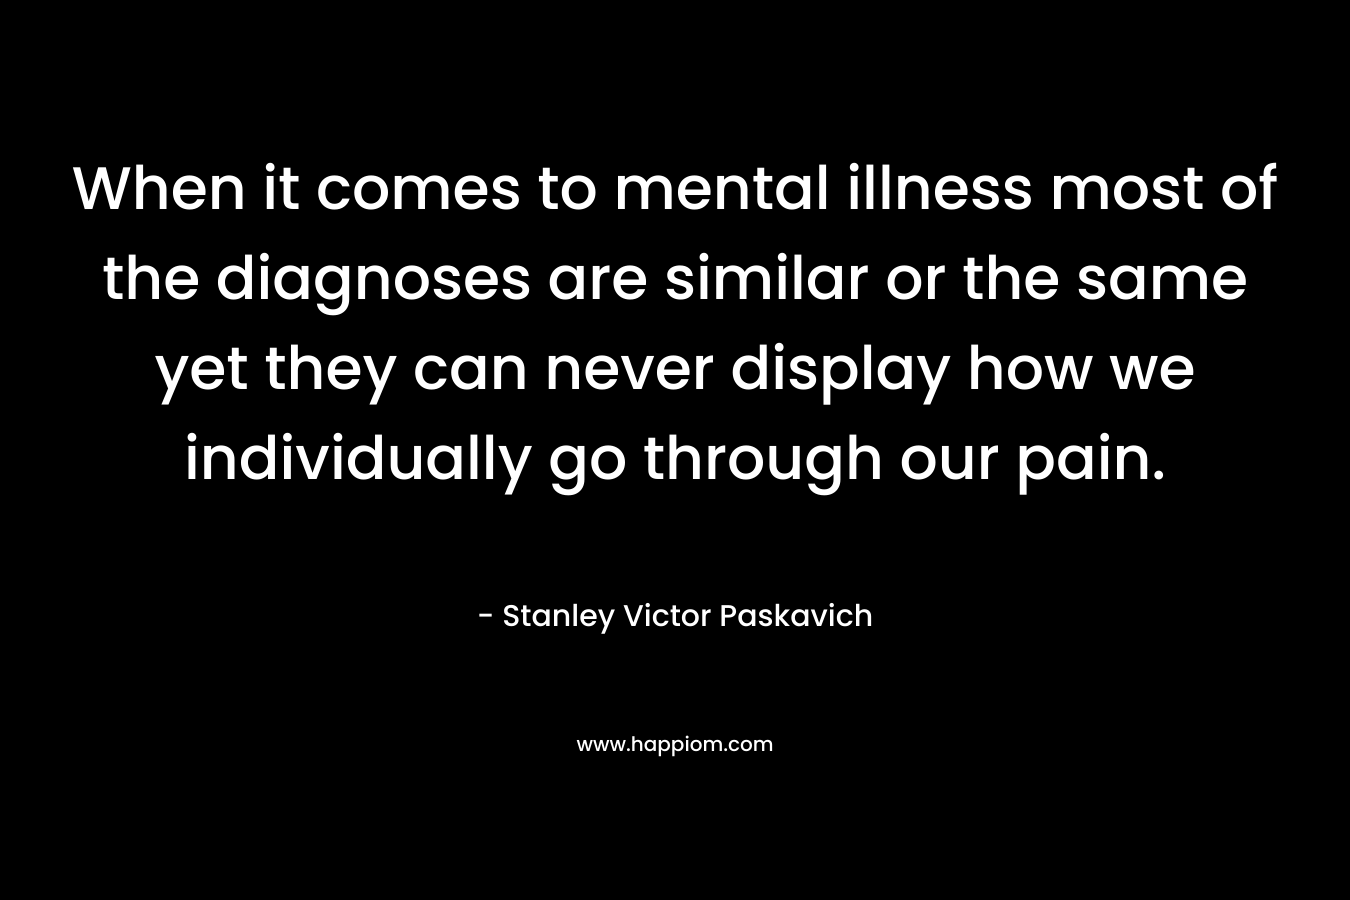 When it comes to mental illness most of the diagnoses are similar or the same yet they can never display how we individually go through our pain.